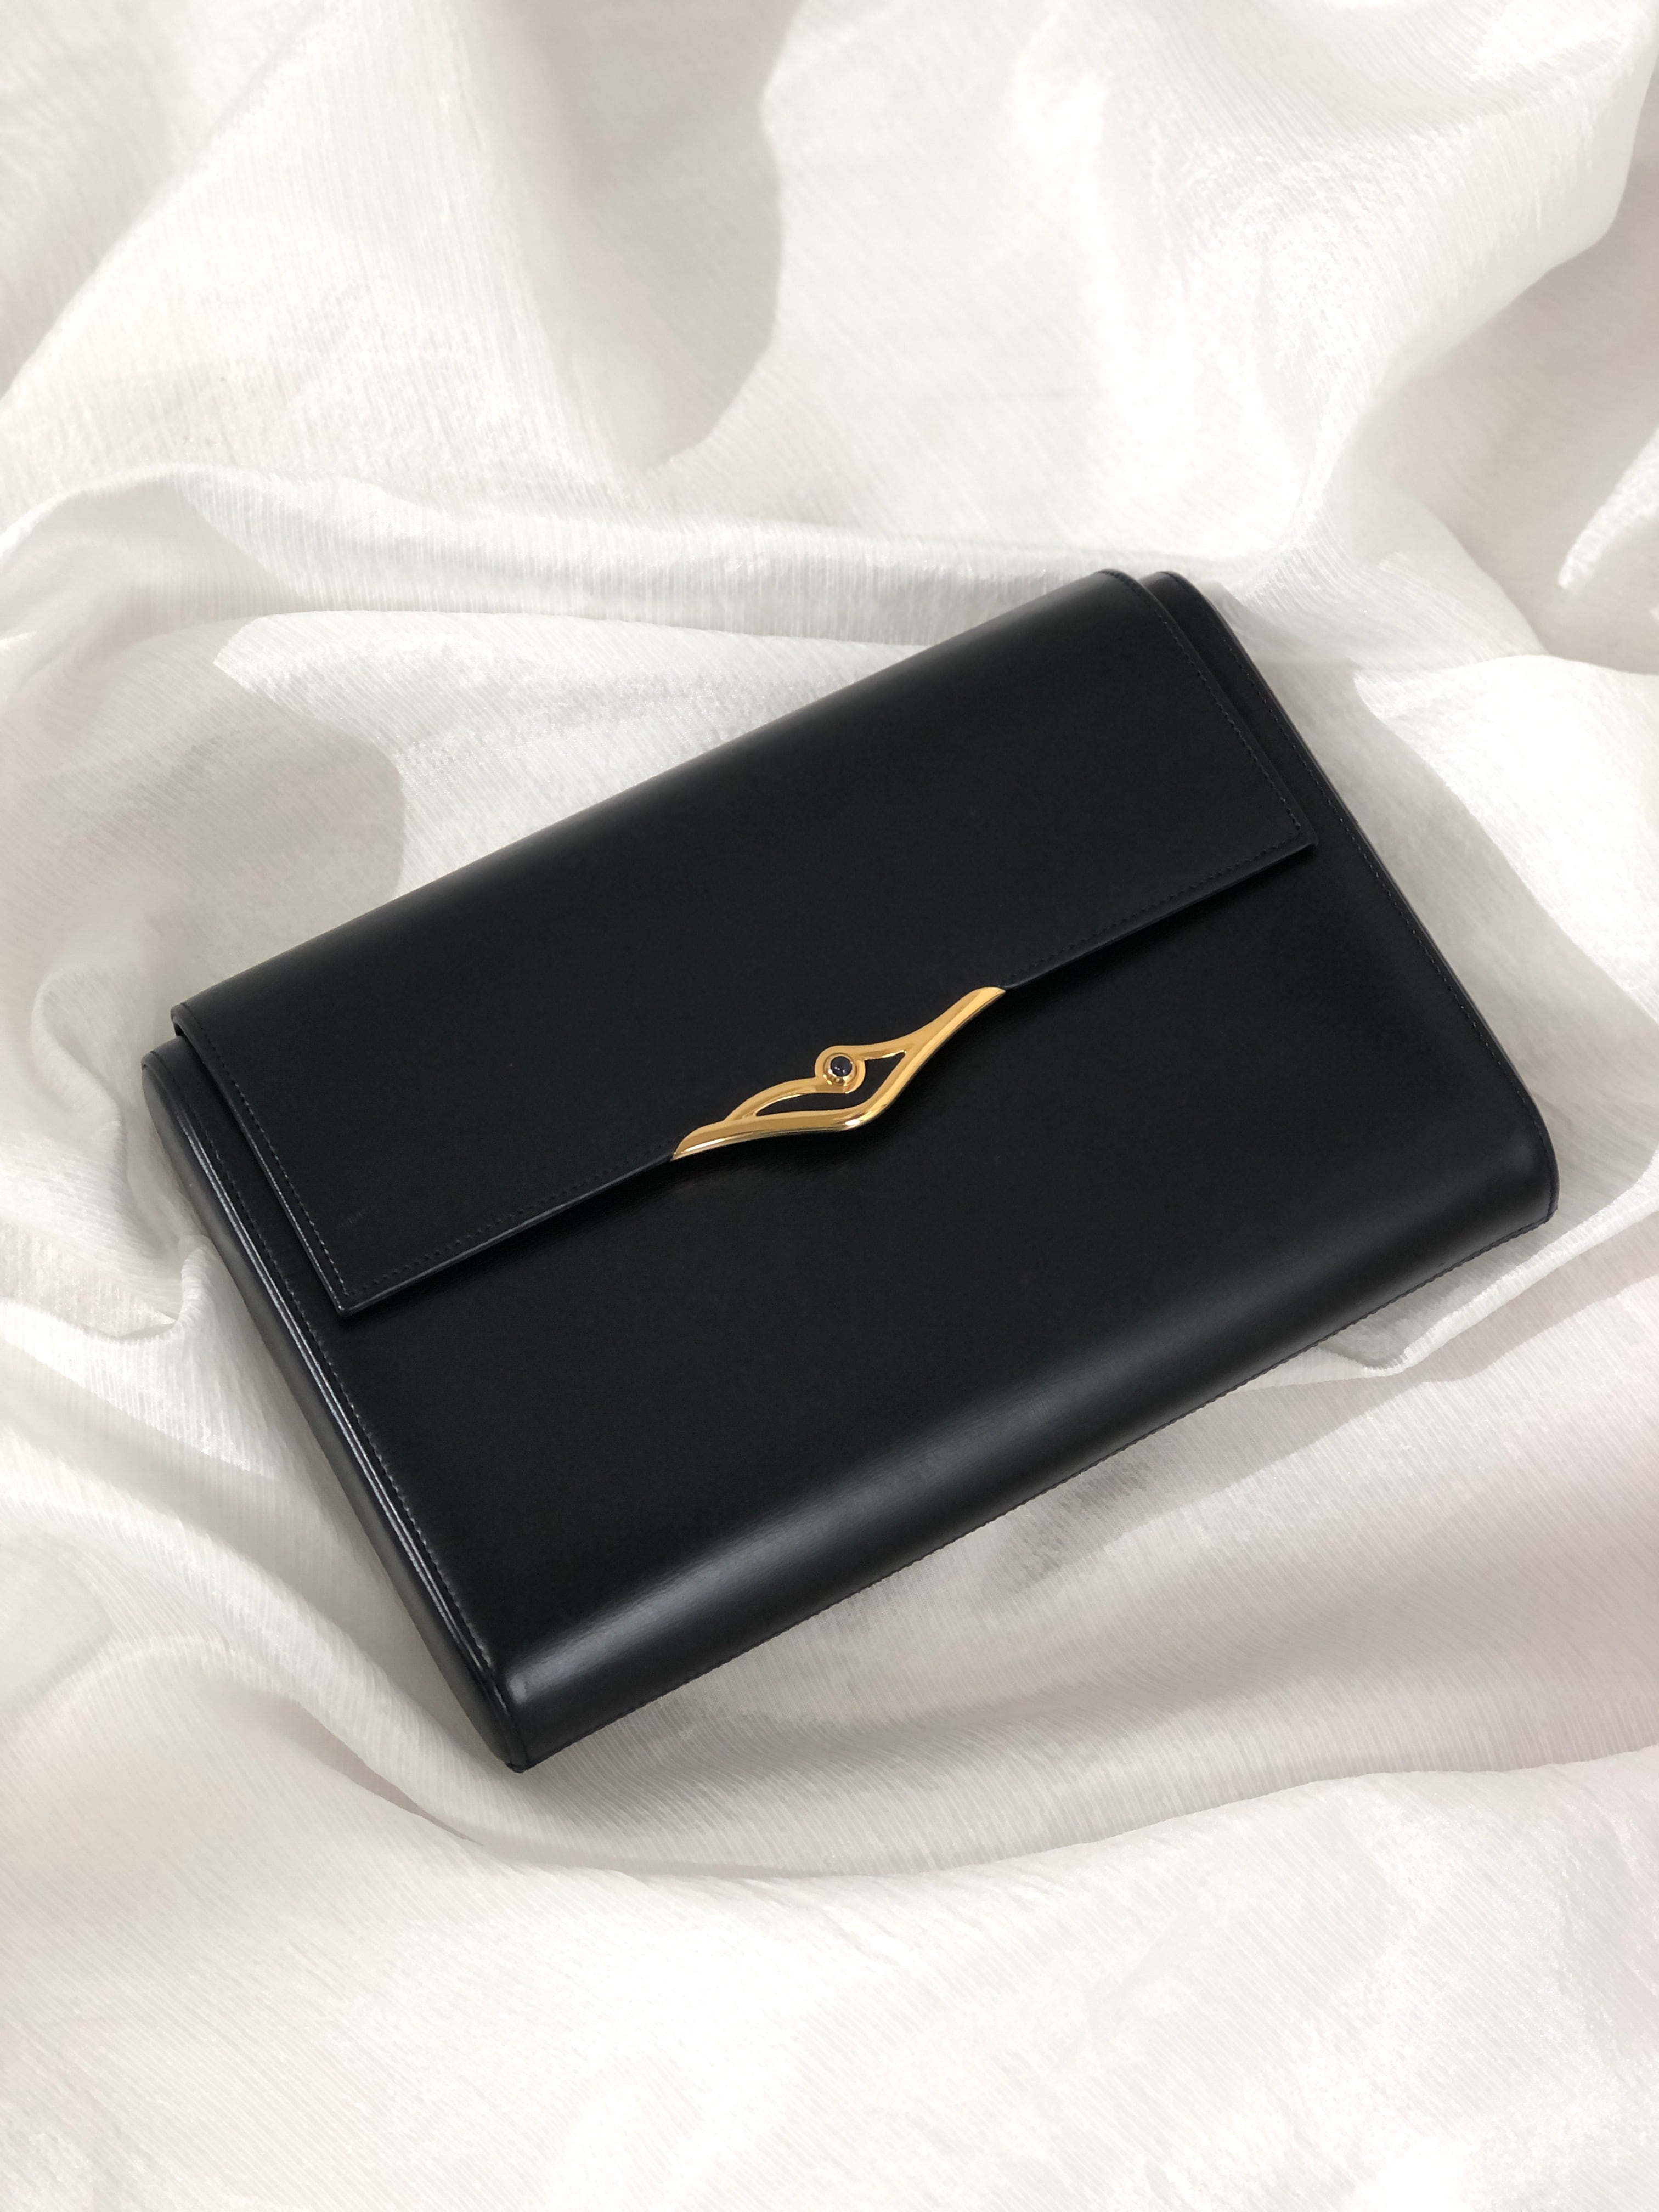 Cartier カルティエ サファイアライン ストーン レザー クラッチバッグ ネイビー vintage ヴィンテージ オールド nu45in |  VintageShop solo powered by BASE